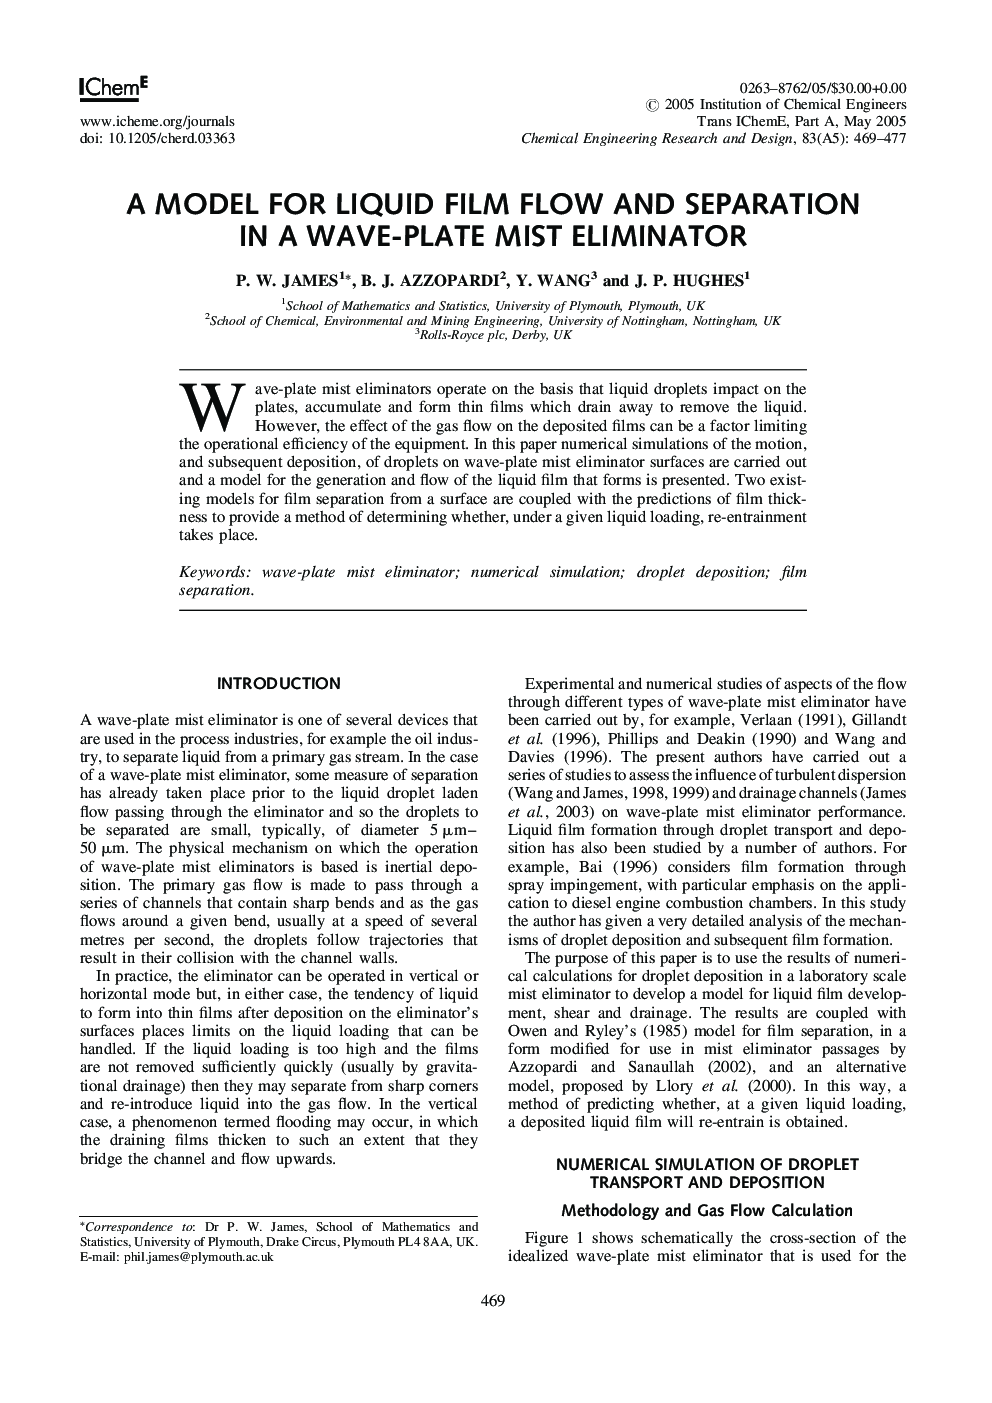 A Model for Liquid Film Flow and Separation in a Wave-Plate Mist Eliminator